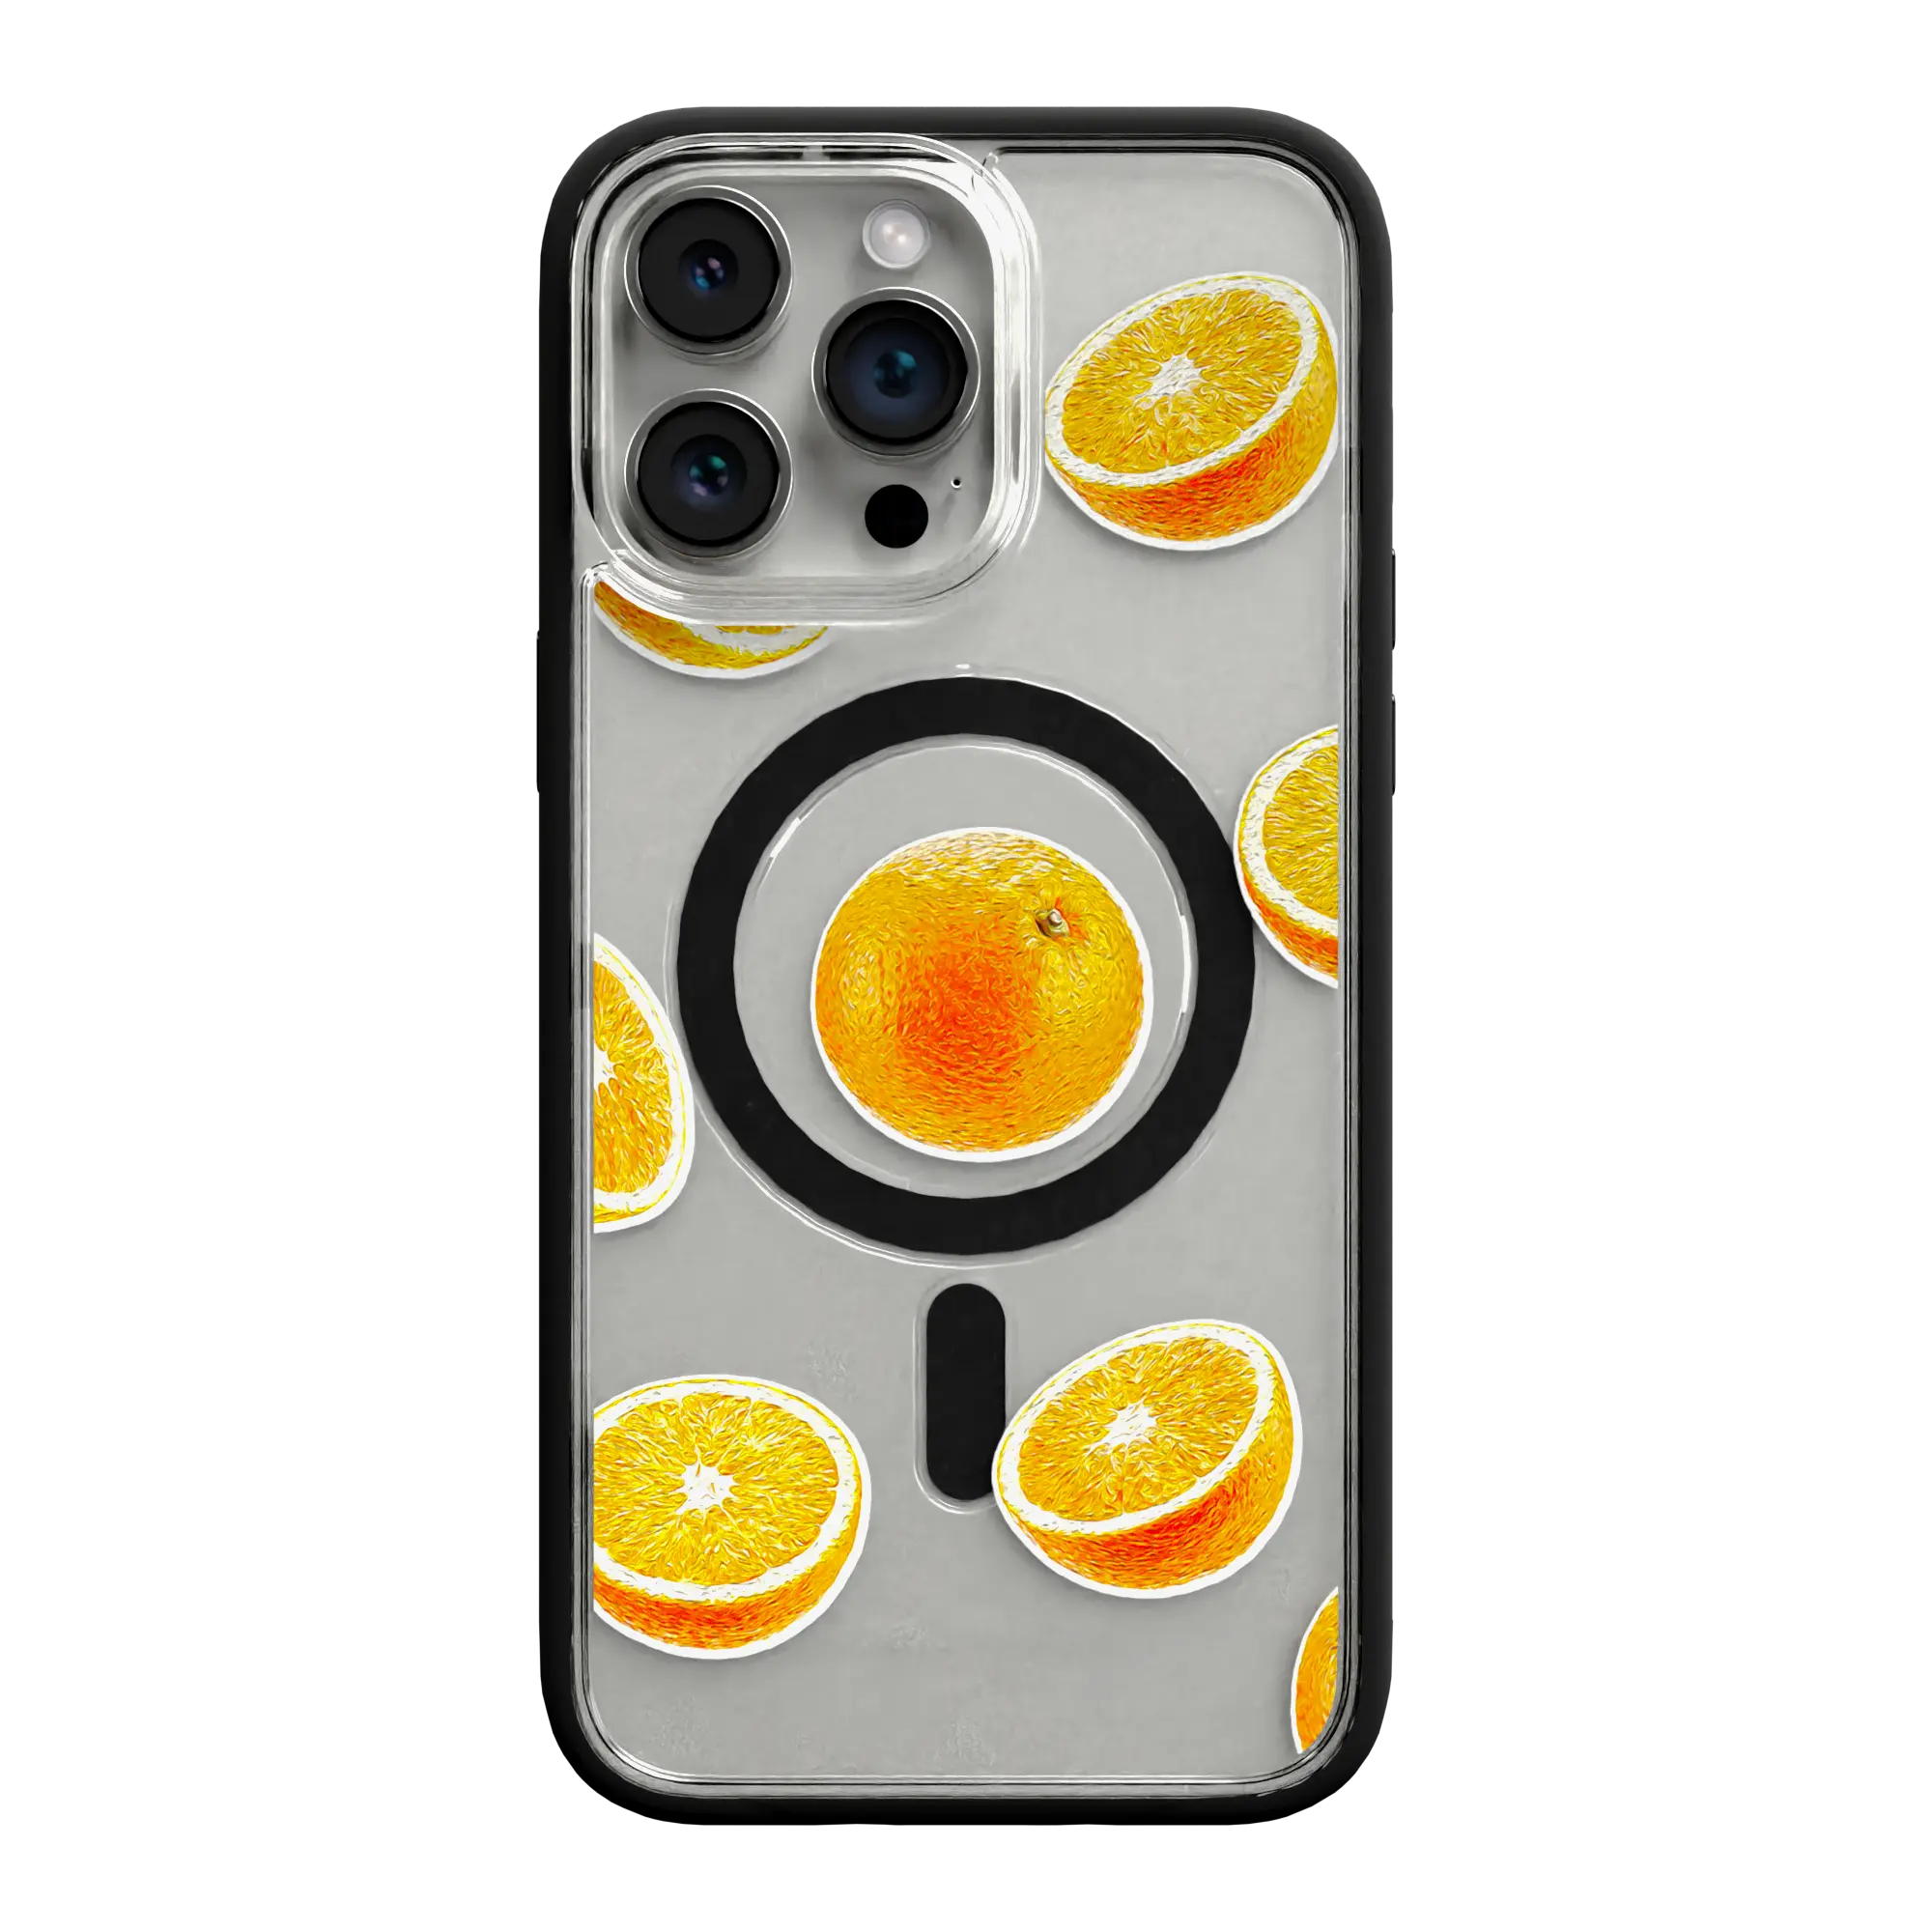 Apple-iPhone-13-Pro-Max-Crystal-Clear Orange Zest | Protective MagSafe Case | Fruits Collection for Apple iPhone 13 Series cellhelmet cellhelmet